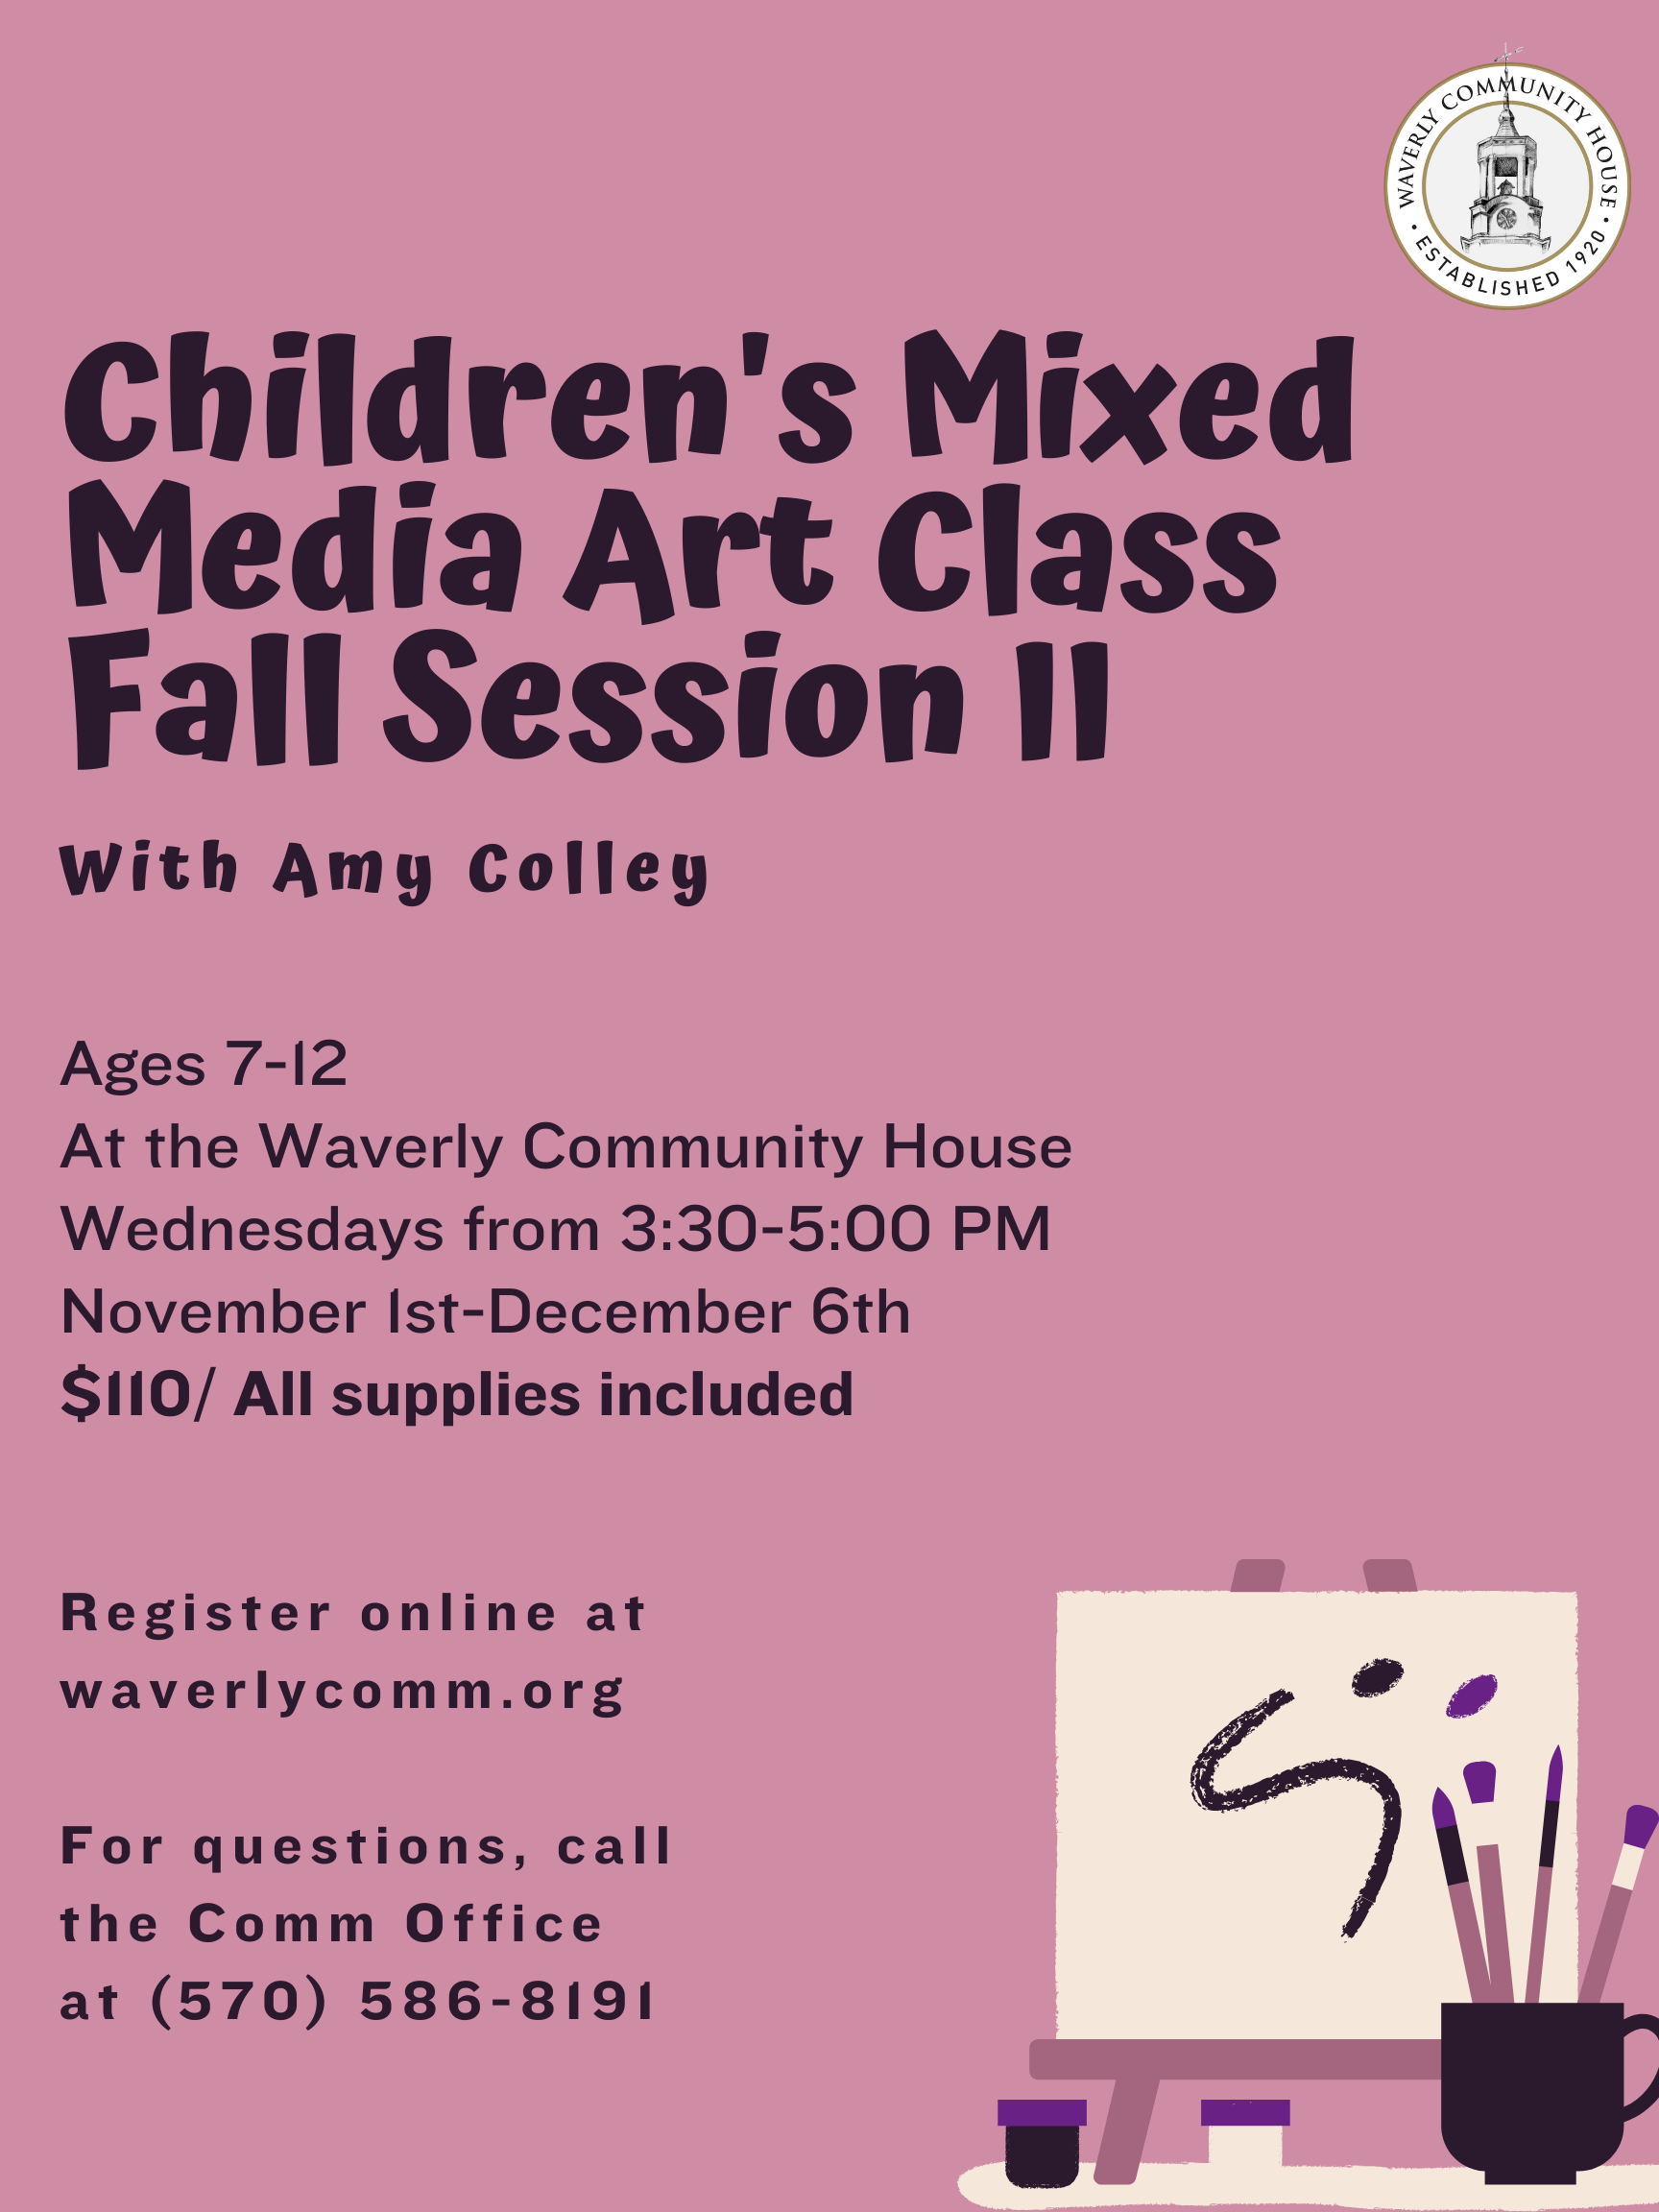 CHILDREN'S MIXED MEDIA ART CLASS with Amy Colley - Fall Session II